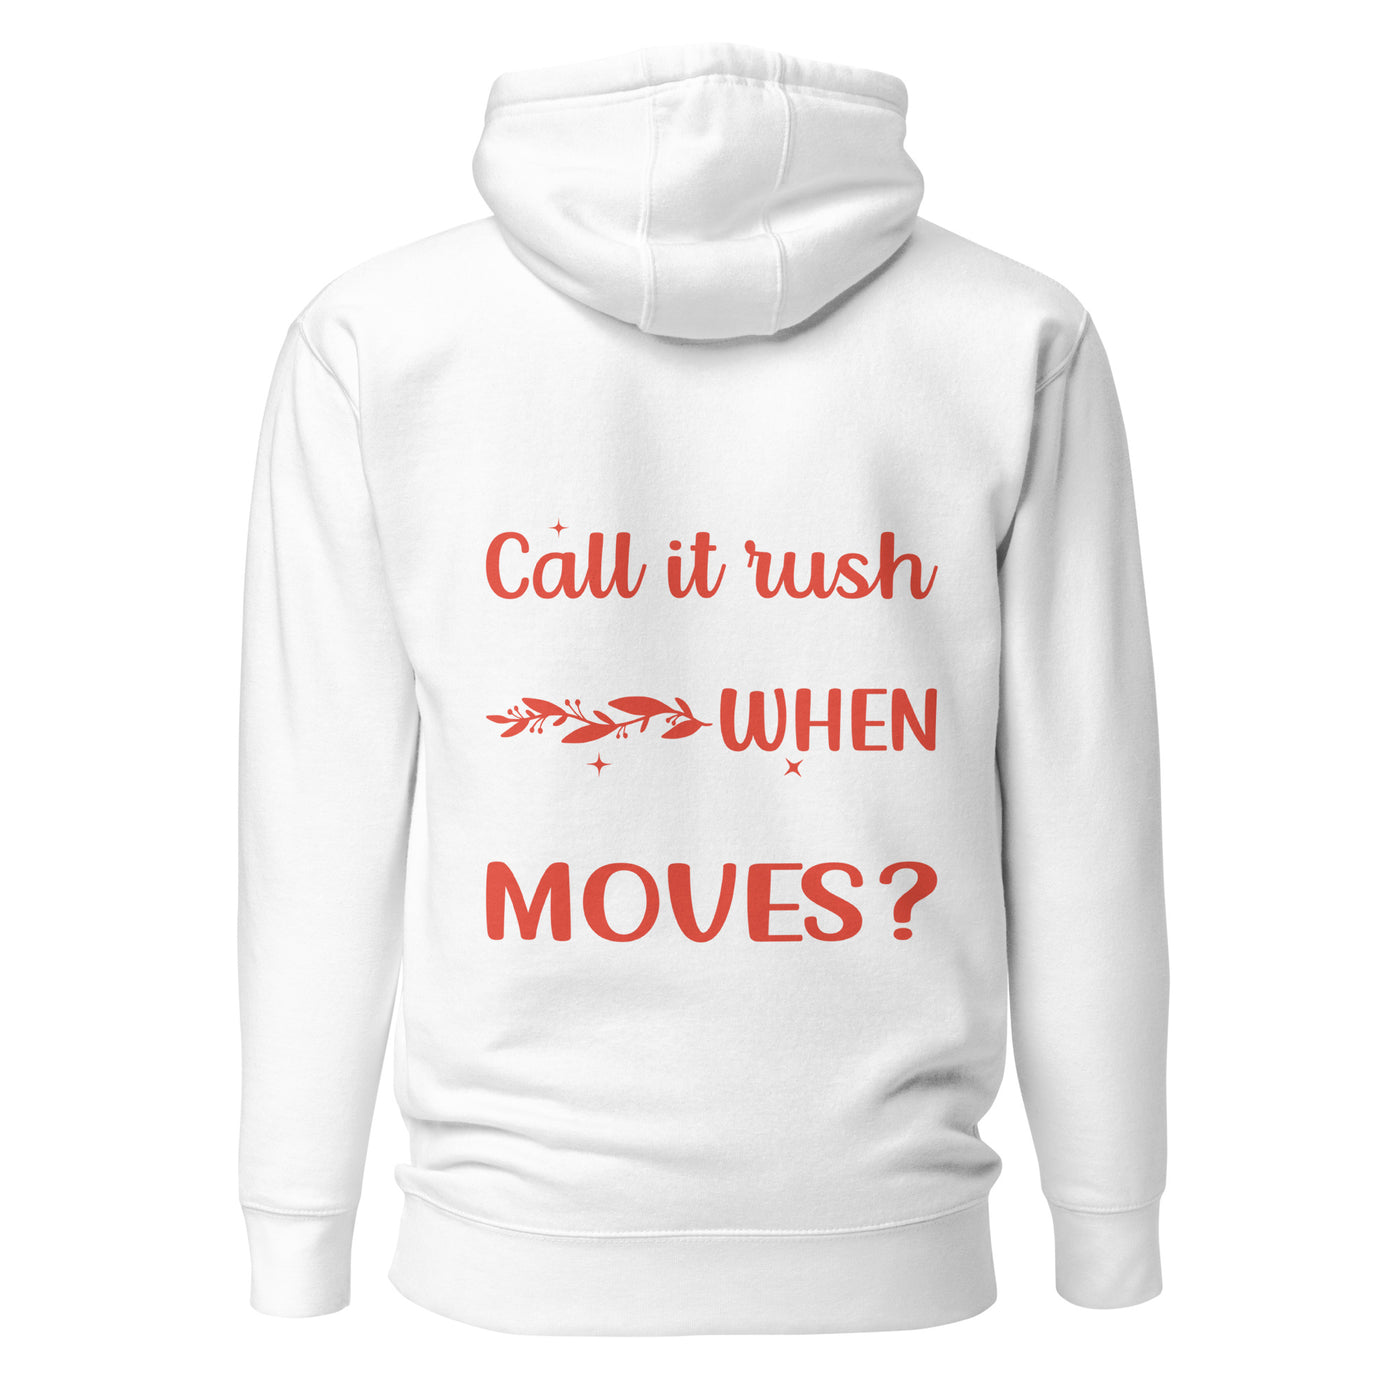 Why do they say Rush Hours, when nothing moves? - Unisex Hoodie ( Back Print )